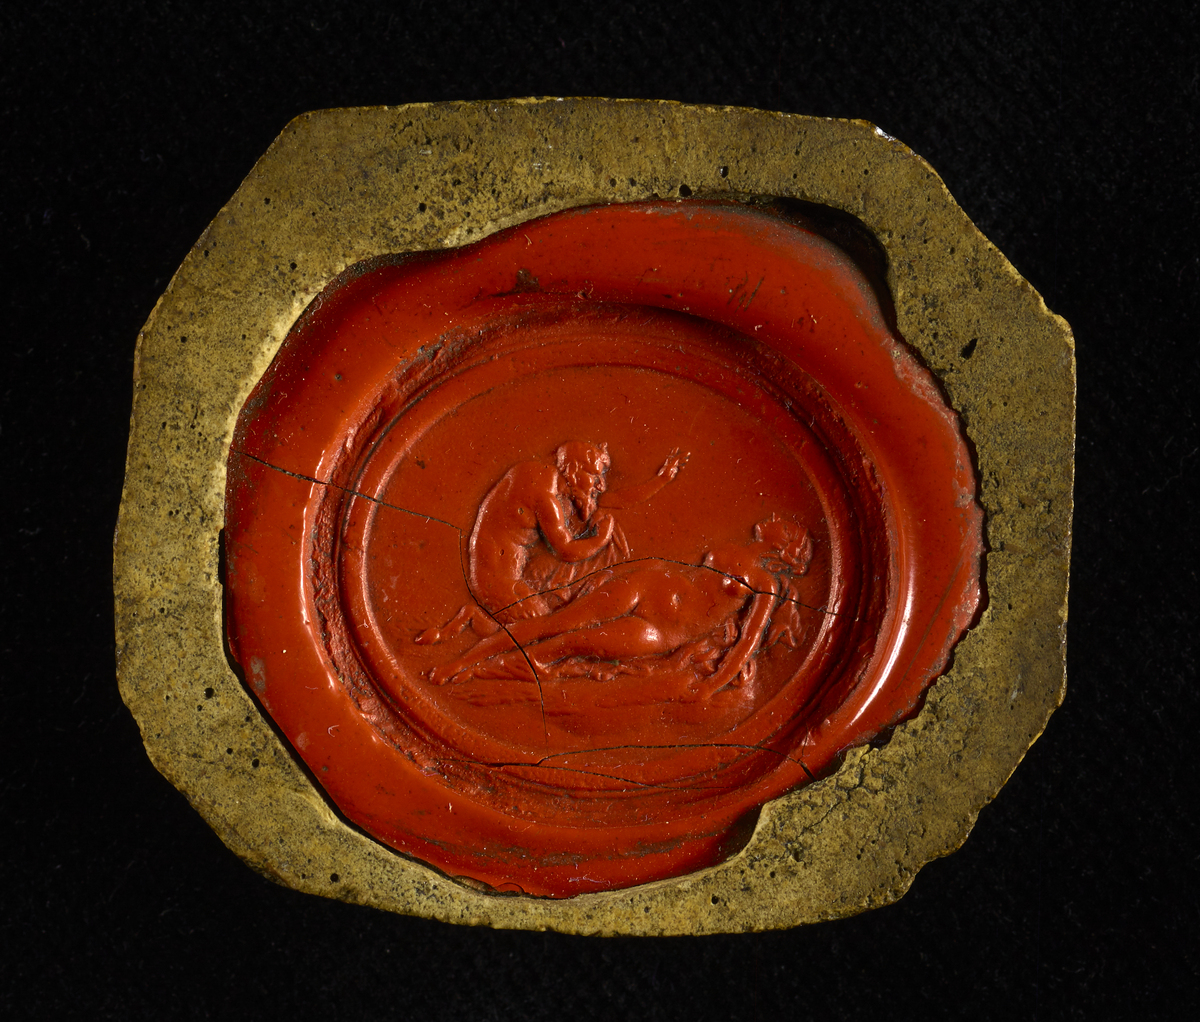 A small red wax seal containing intricate, classical-looking artwork. A nude lady is shown interacting with a bearded man. The man has a tail which suggests this may be a representation of the Devil. 